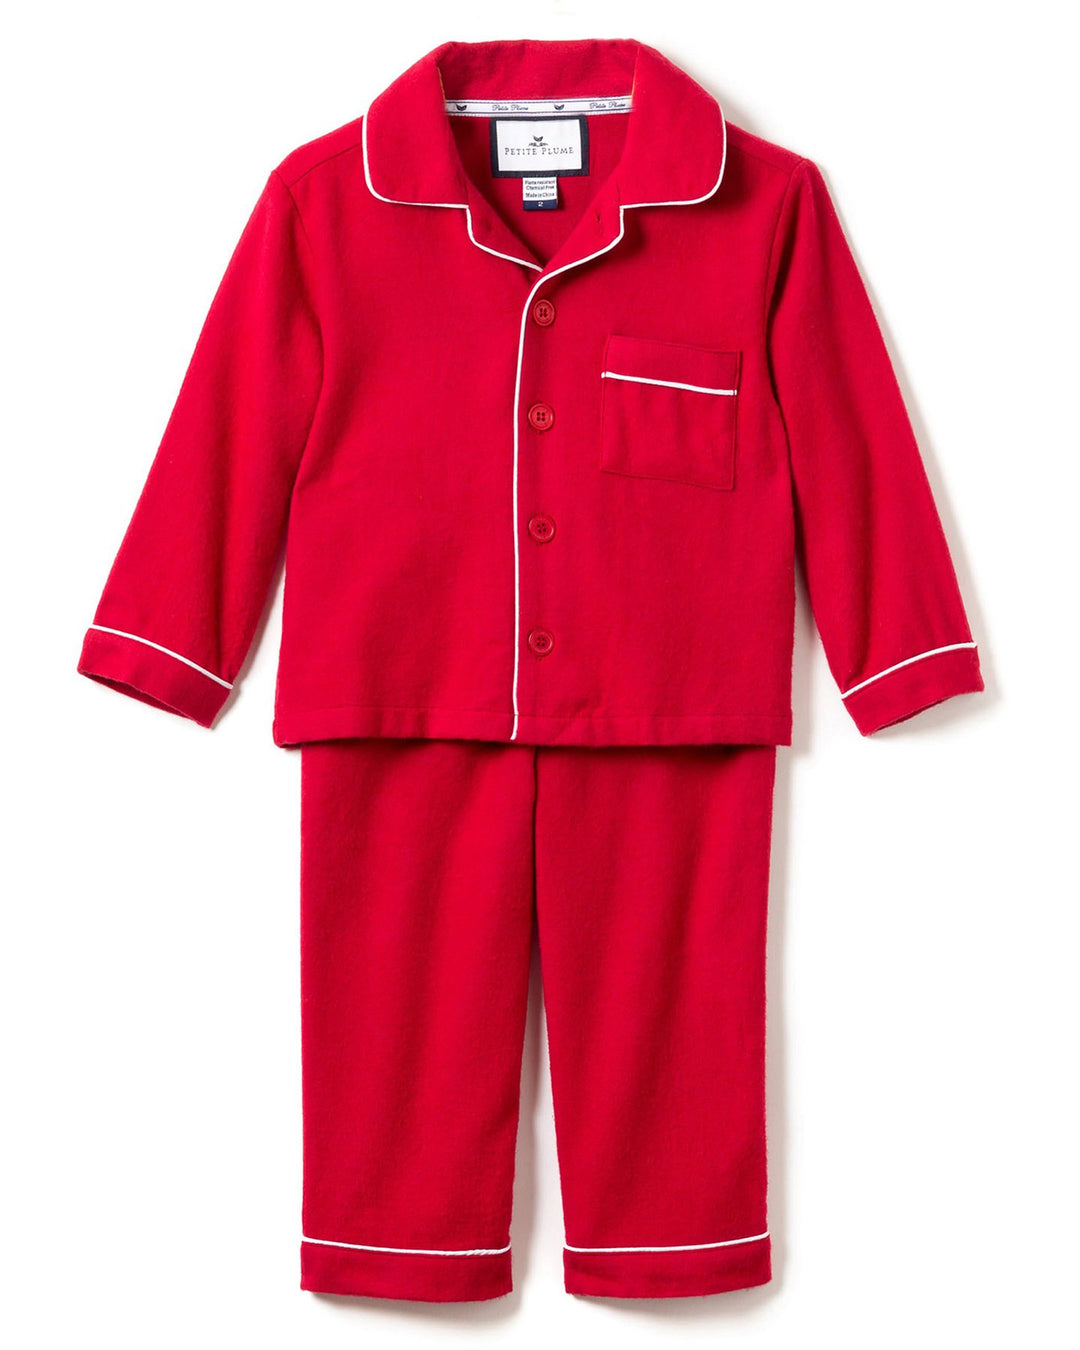 Classic Red Flannel Pajamas